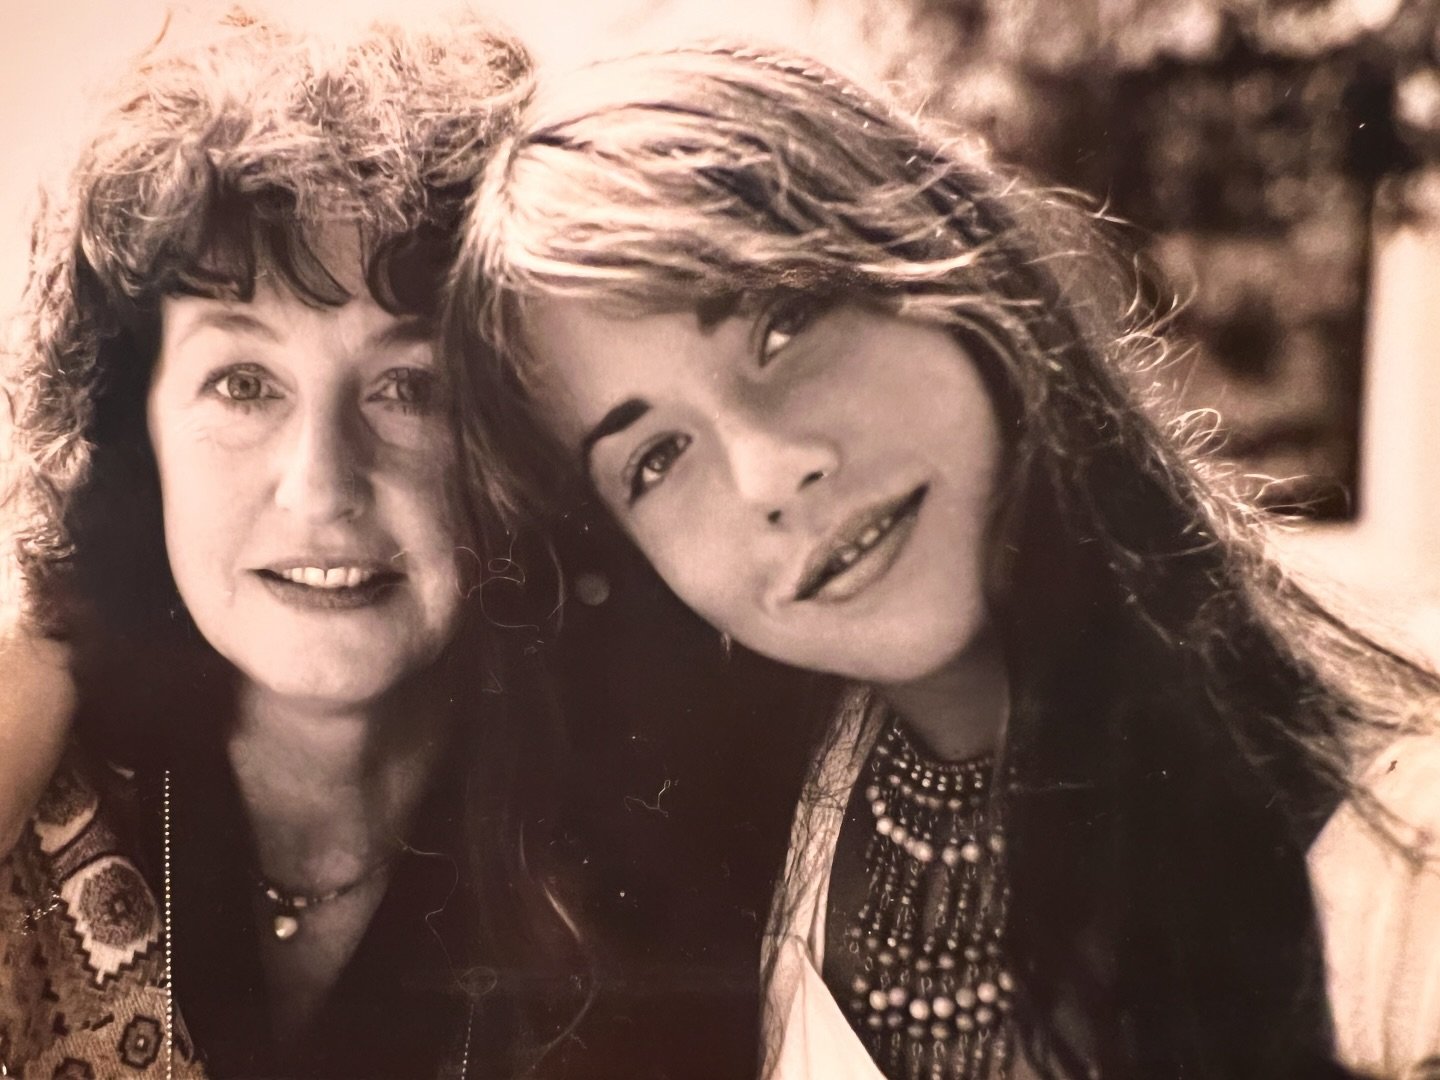 Happy Earth Day🌎
Here&rsquo;s Josephine my gorgeous Mama Goddess, the woman who brought me to Earth. Isn&rsquo;t she beautiful! I think I&rsquo;m about 17 or 18 here, full of mischief and dreams and chaos. Wearing wonderful necklaces. Much the same 